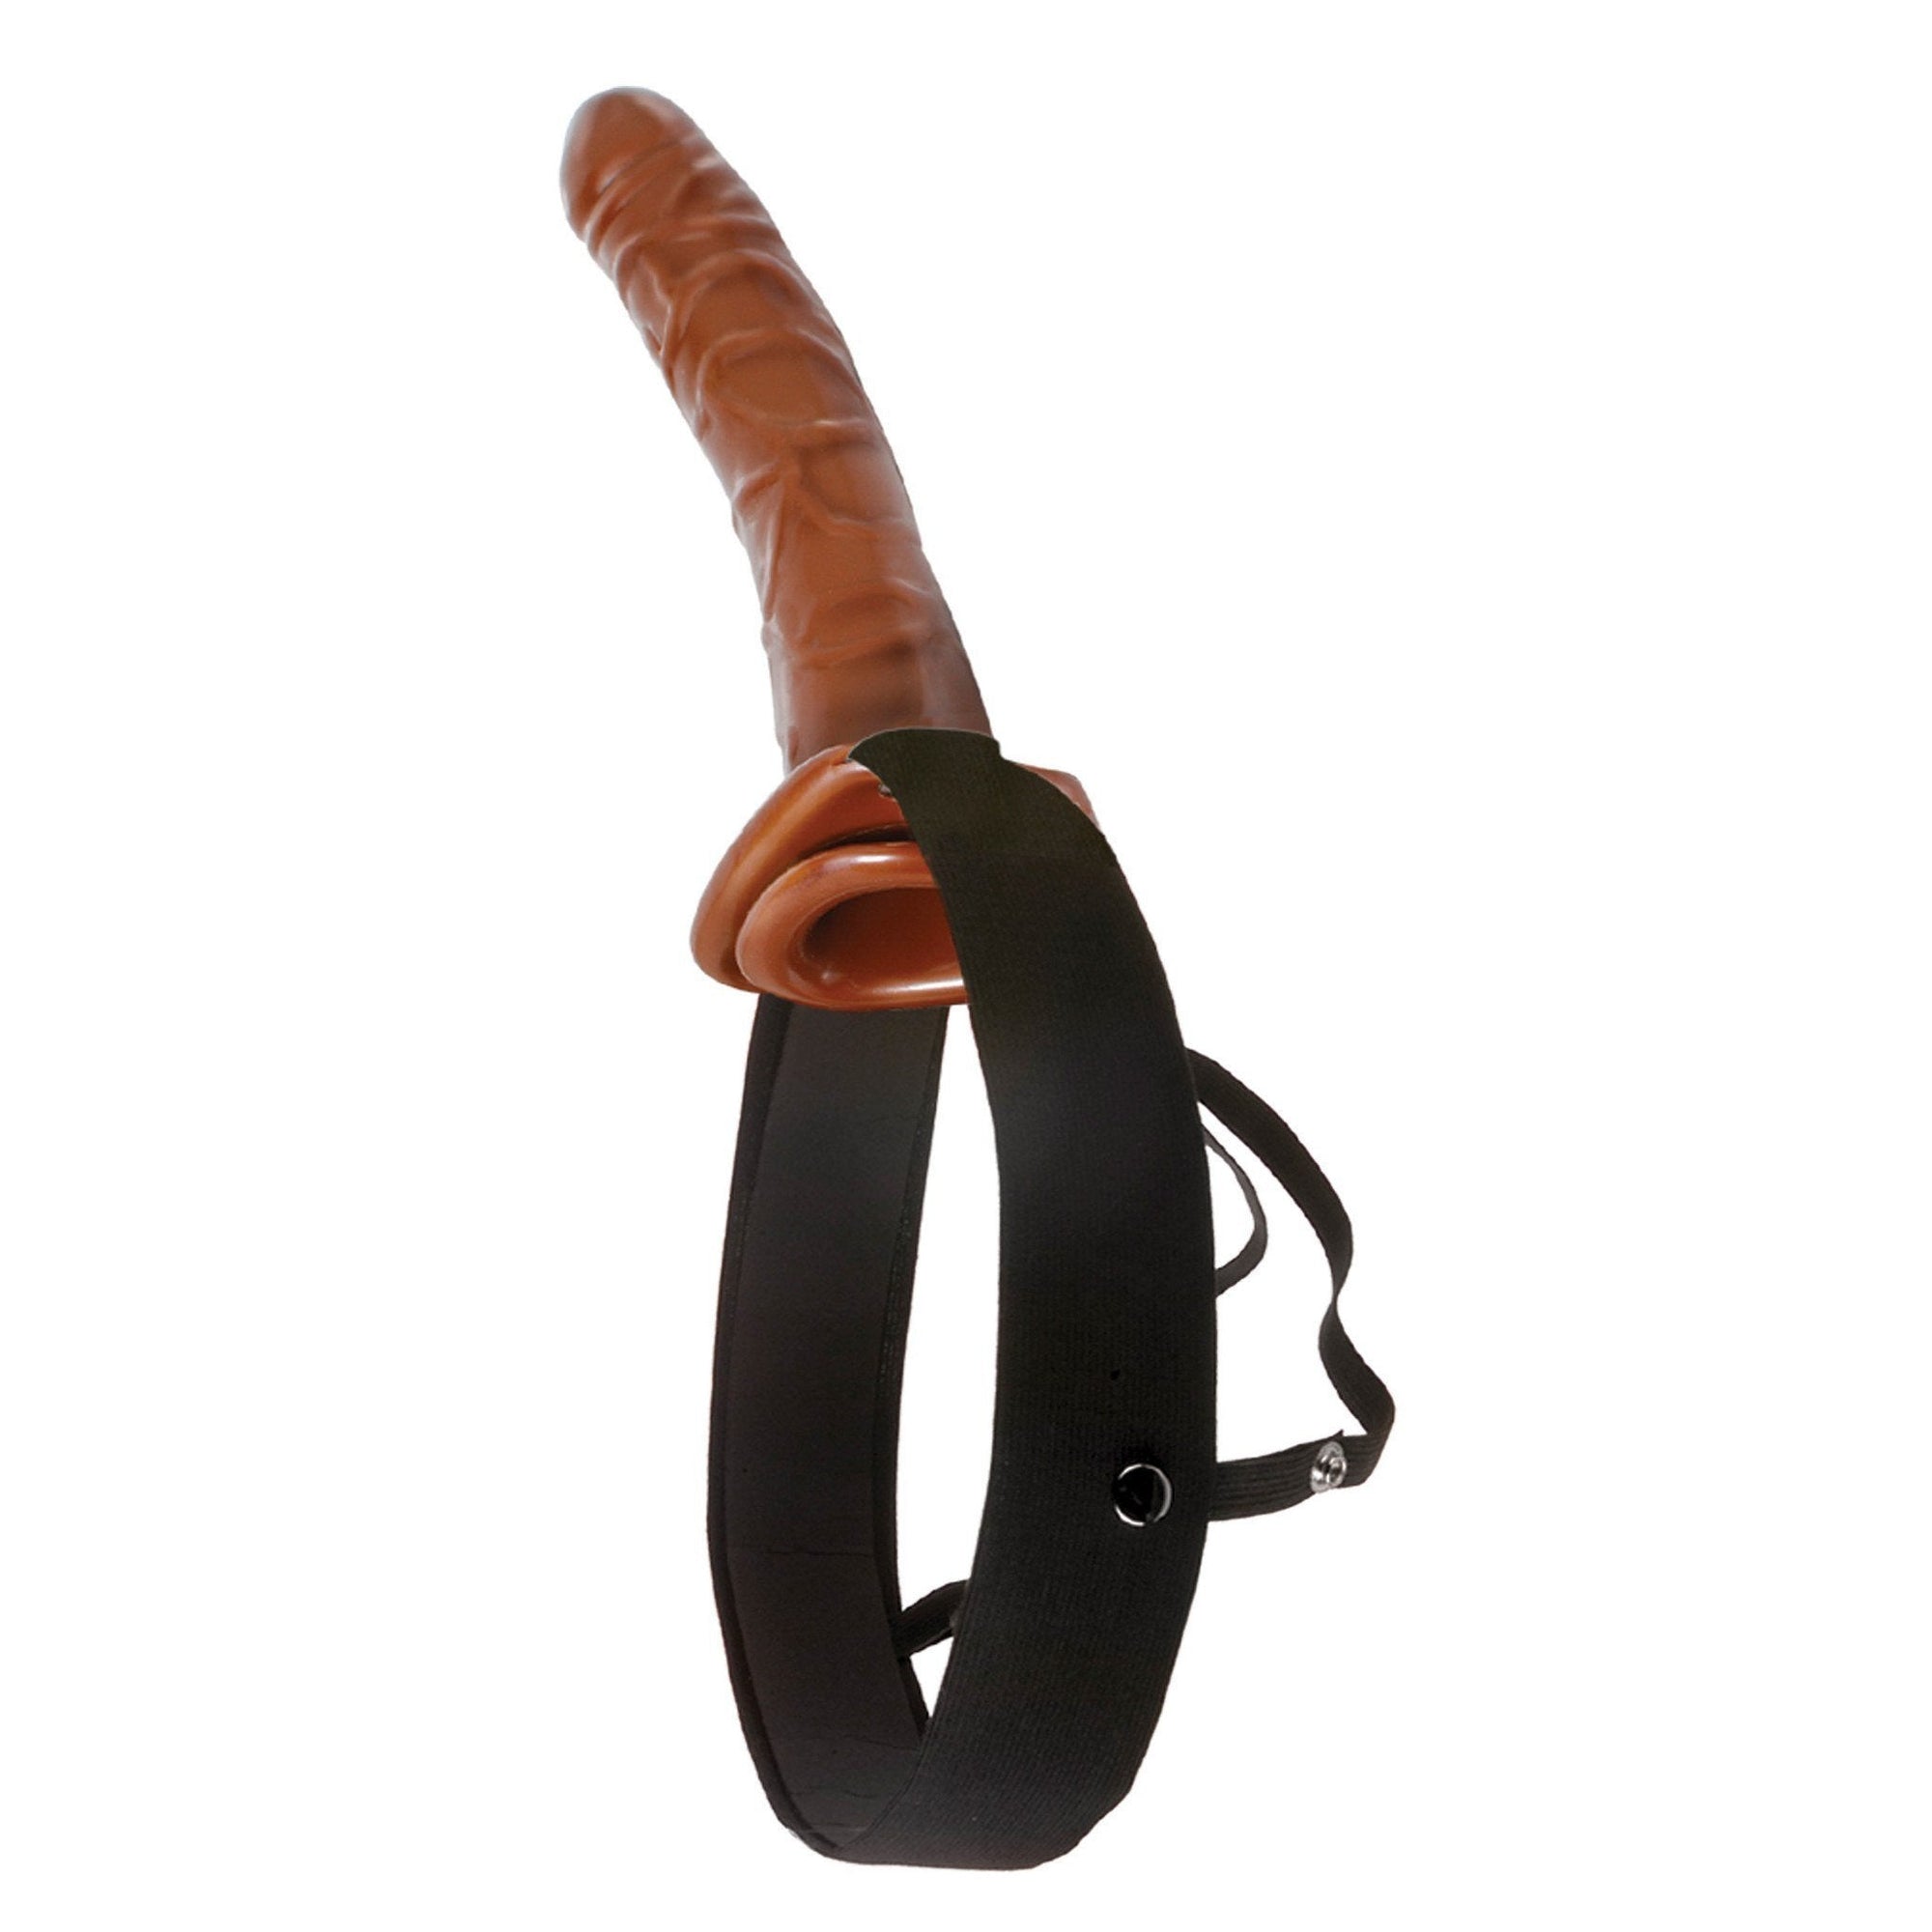 Pipedream - Fetish Fantasy Series 10" Chocolate Dream Hollow Strap-On (Brown) -  Strap On with Hollow Dildo for Male (Non Vibration)  Durio.sg